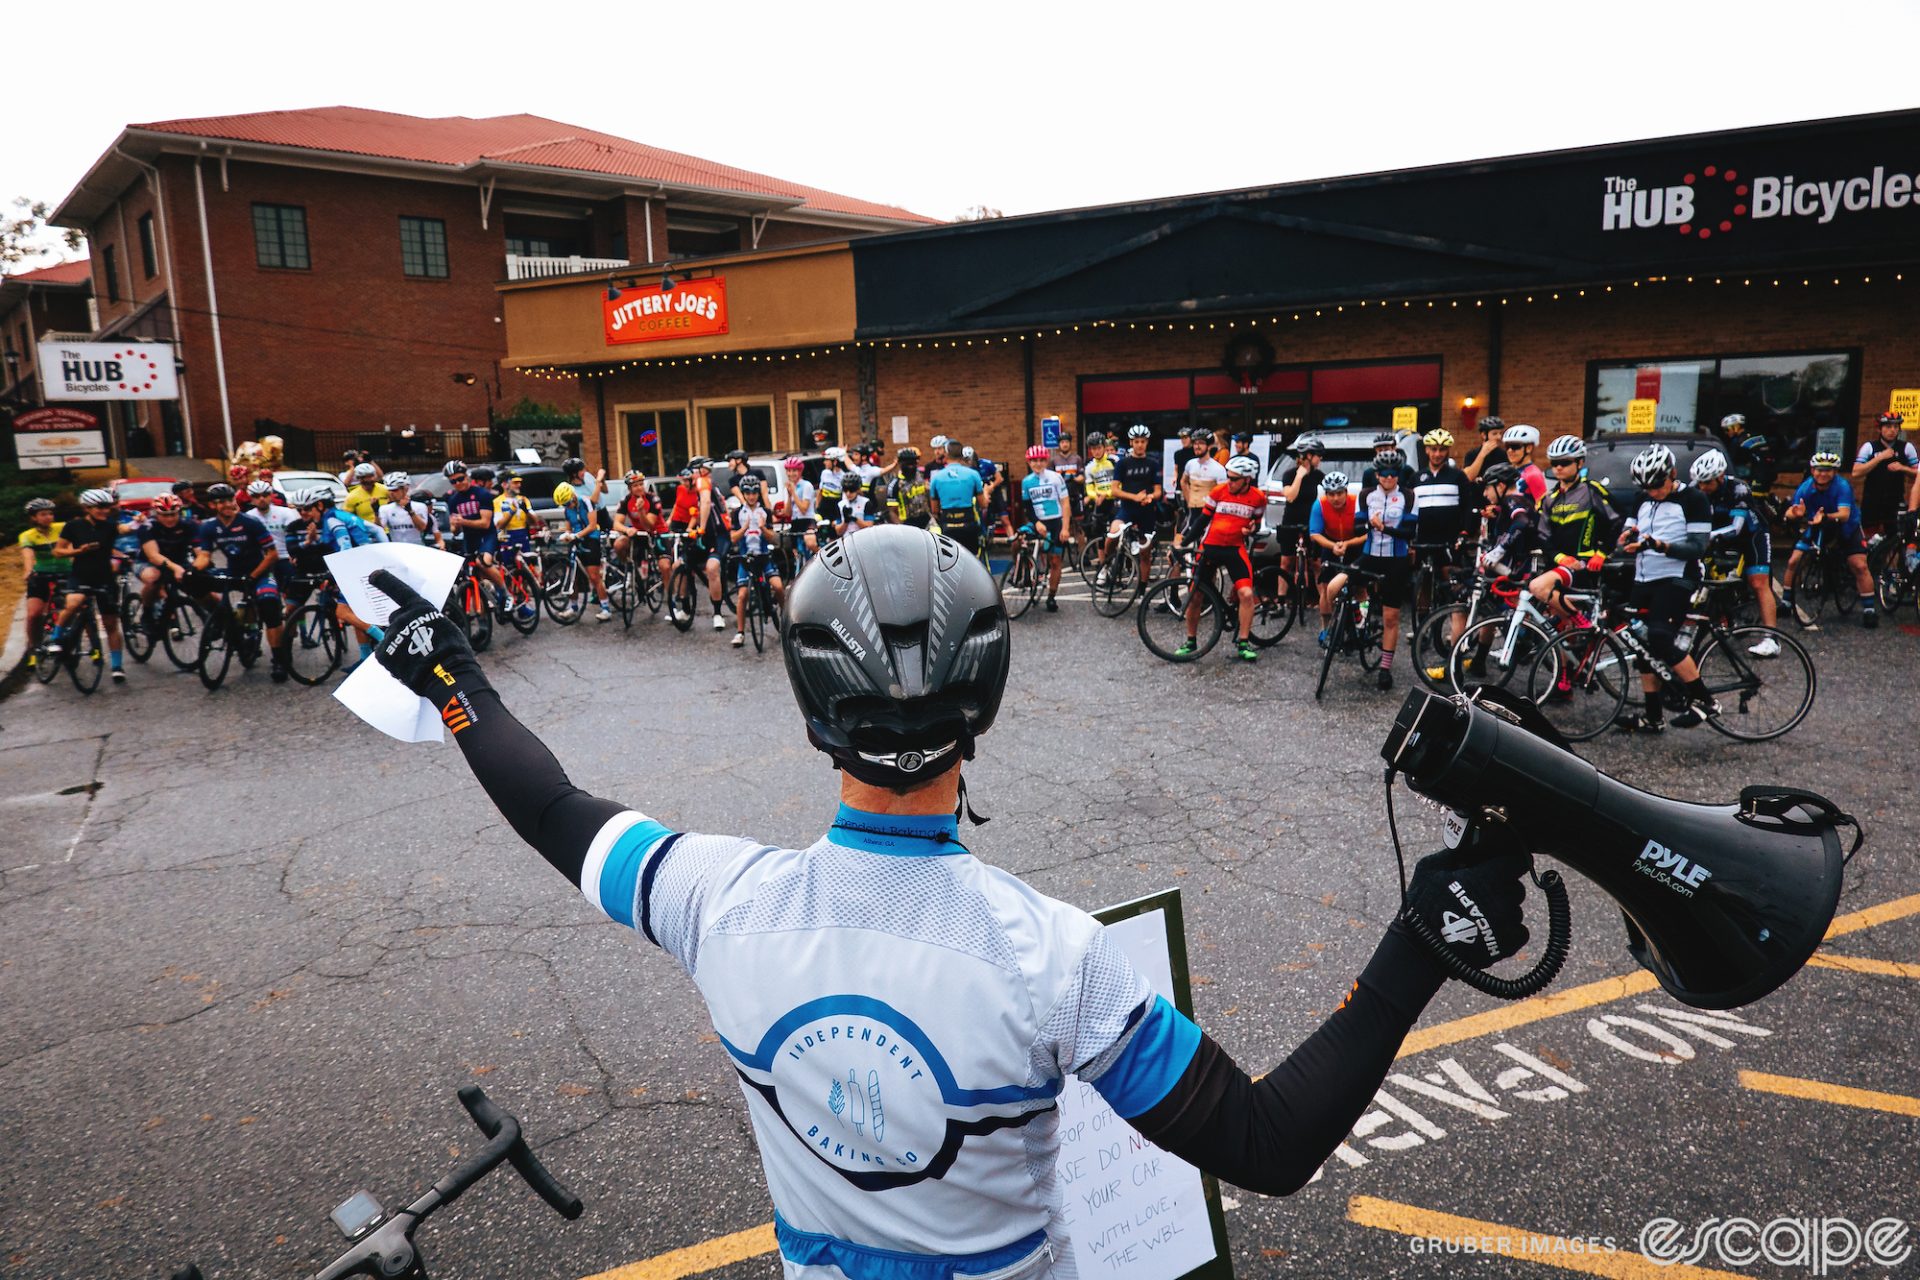 A cyclist and group ride leader addresses a pack of cyclists outside a bike shop before a group ride. He's holding a megaphone.